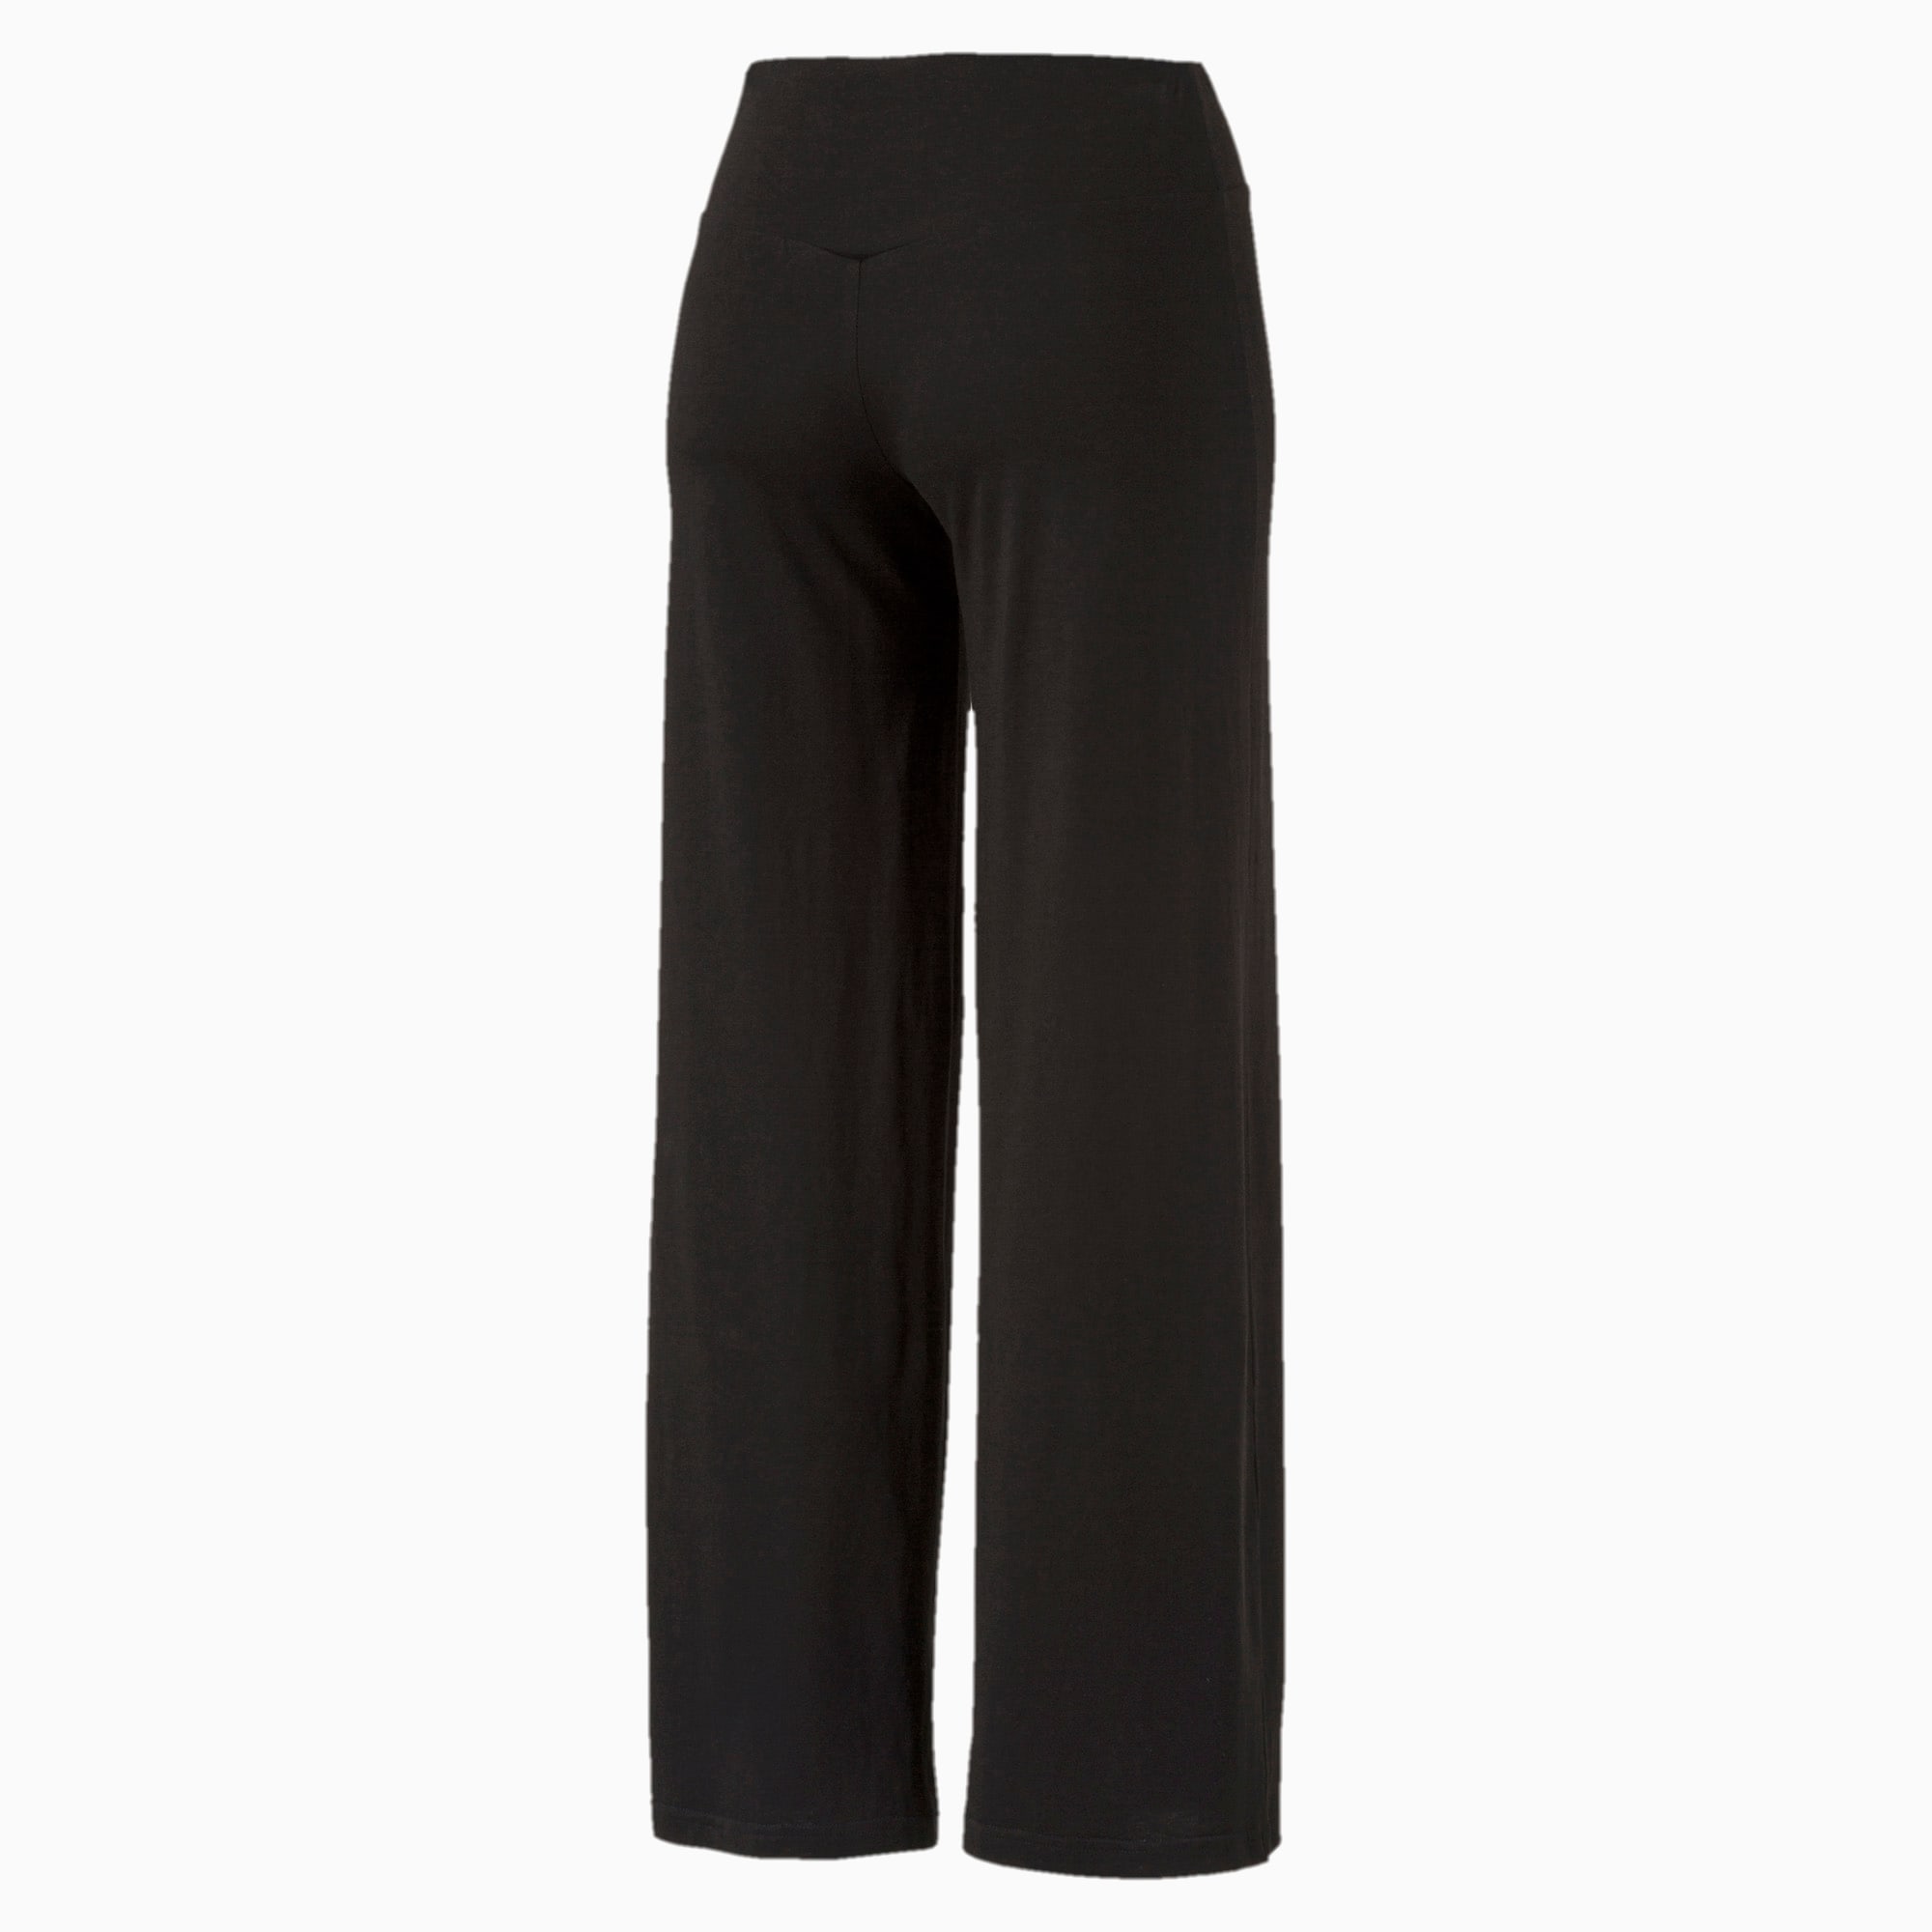 Women's Transition Flared Pants